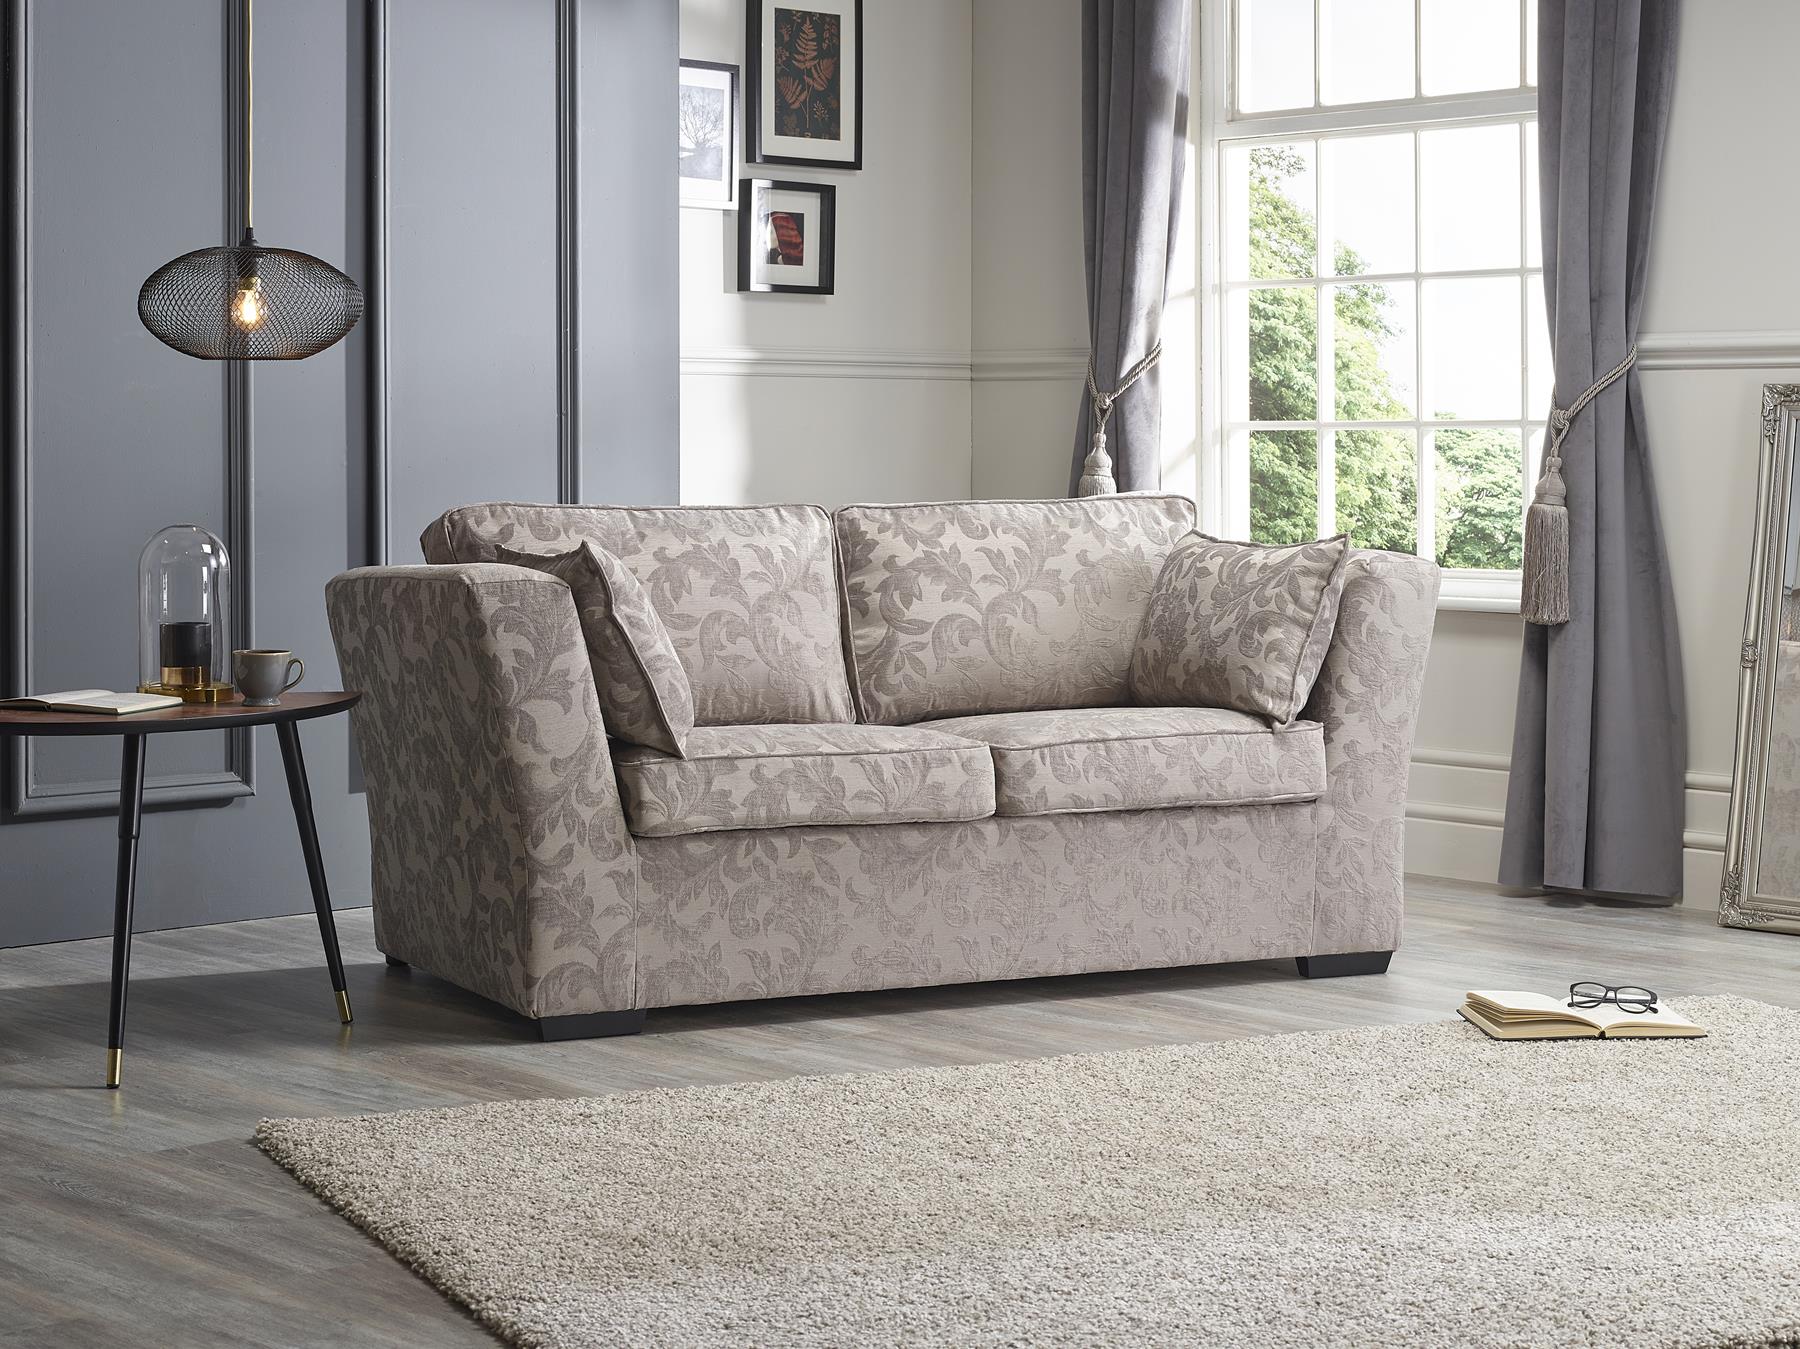 (c) Sofabed.co.uk